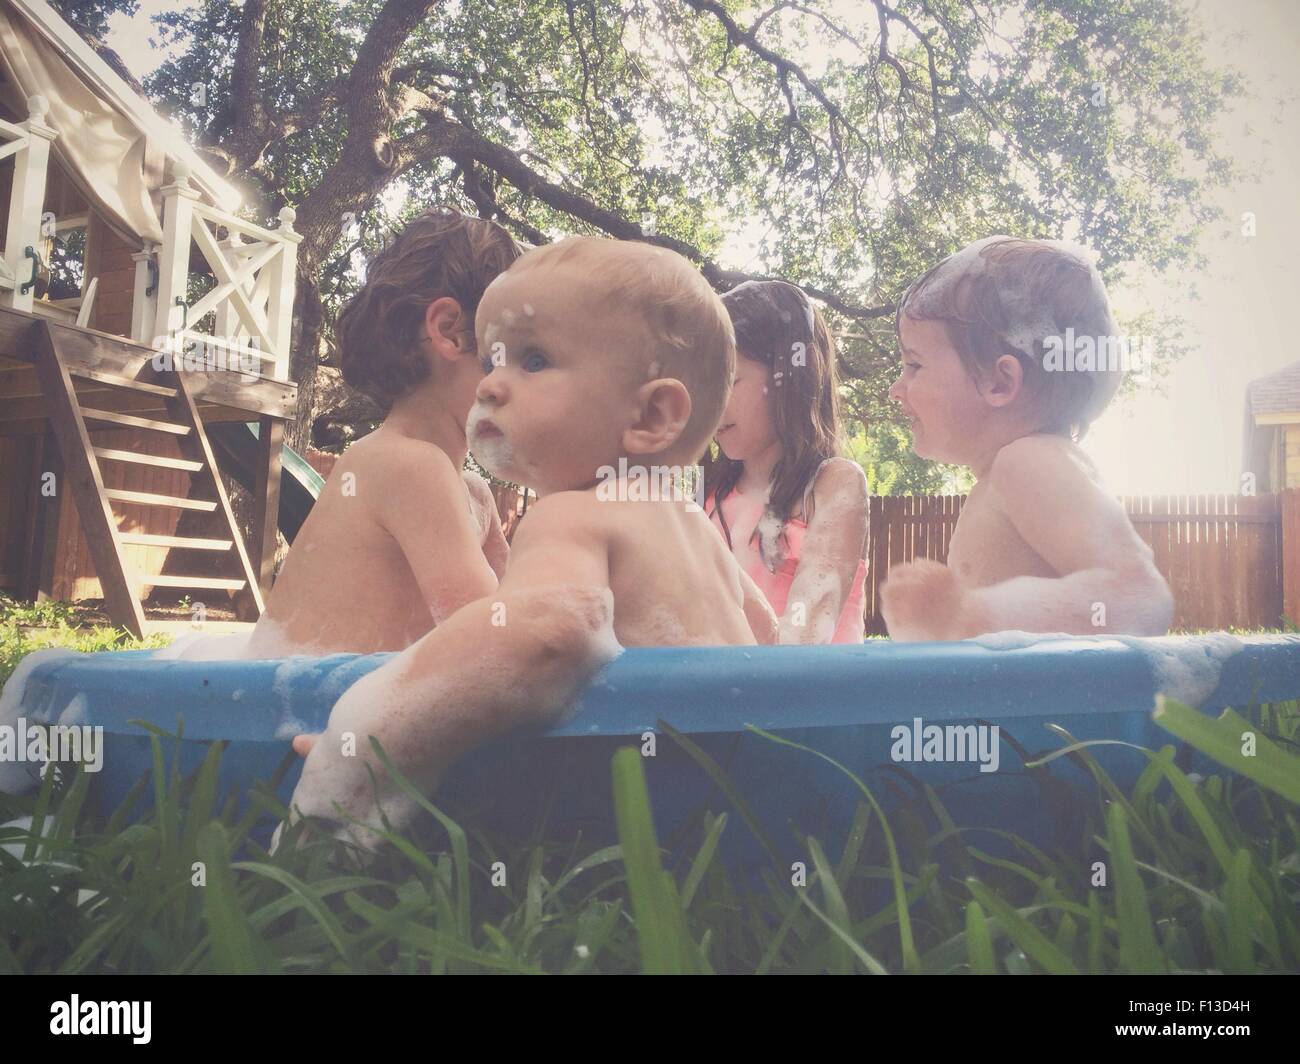 Children bathing and playing in an outdoor bath tub in the garden Stock Photo